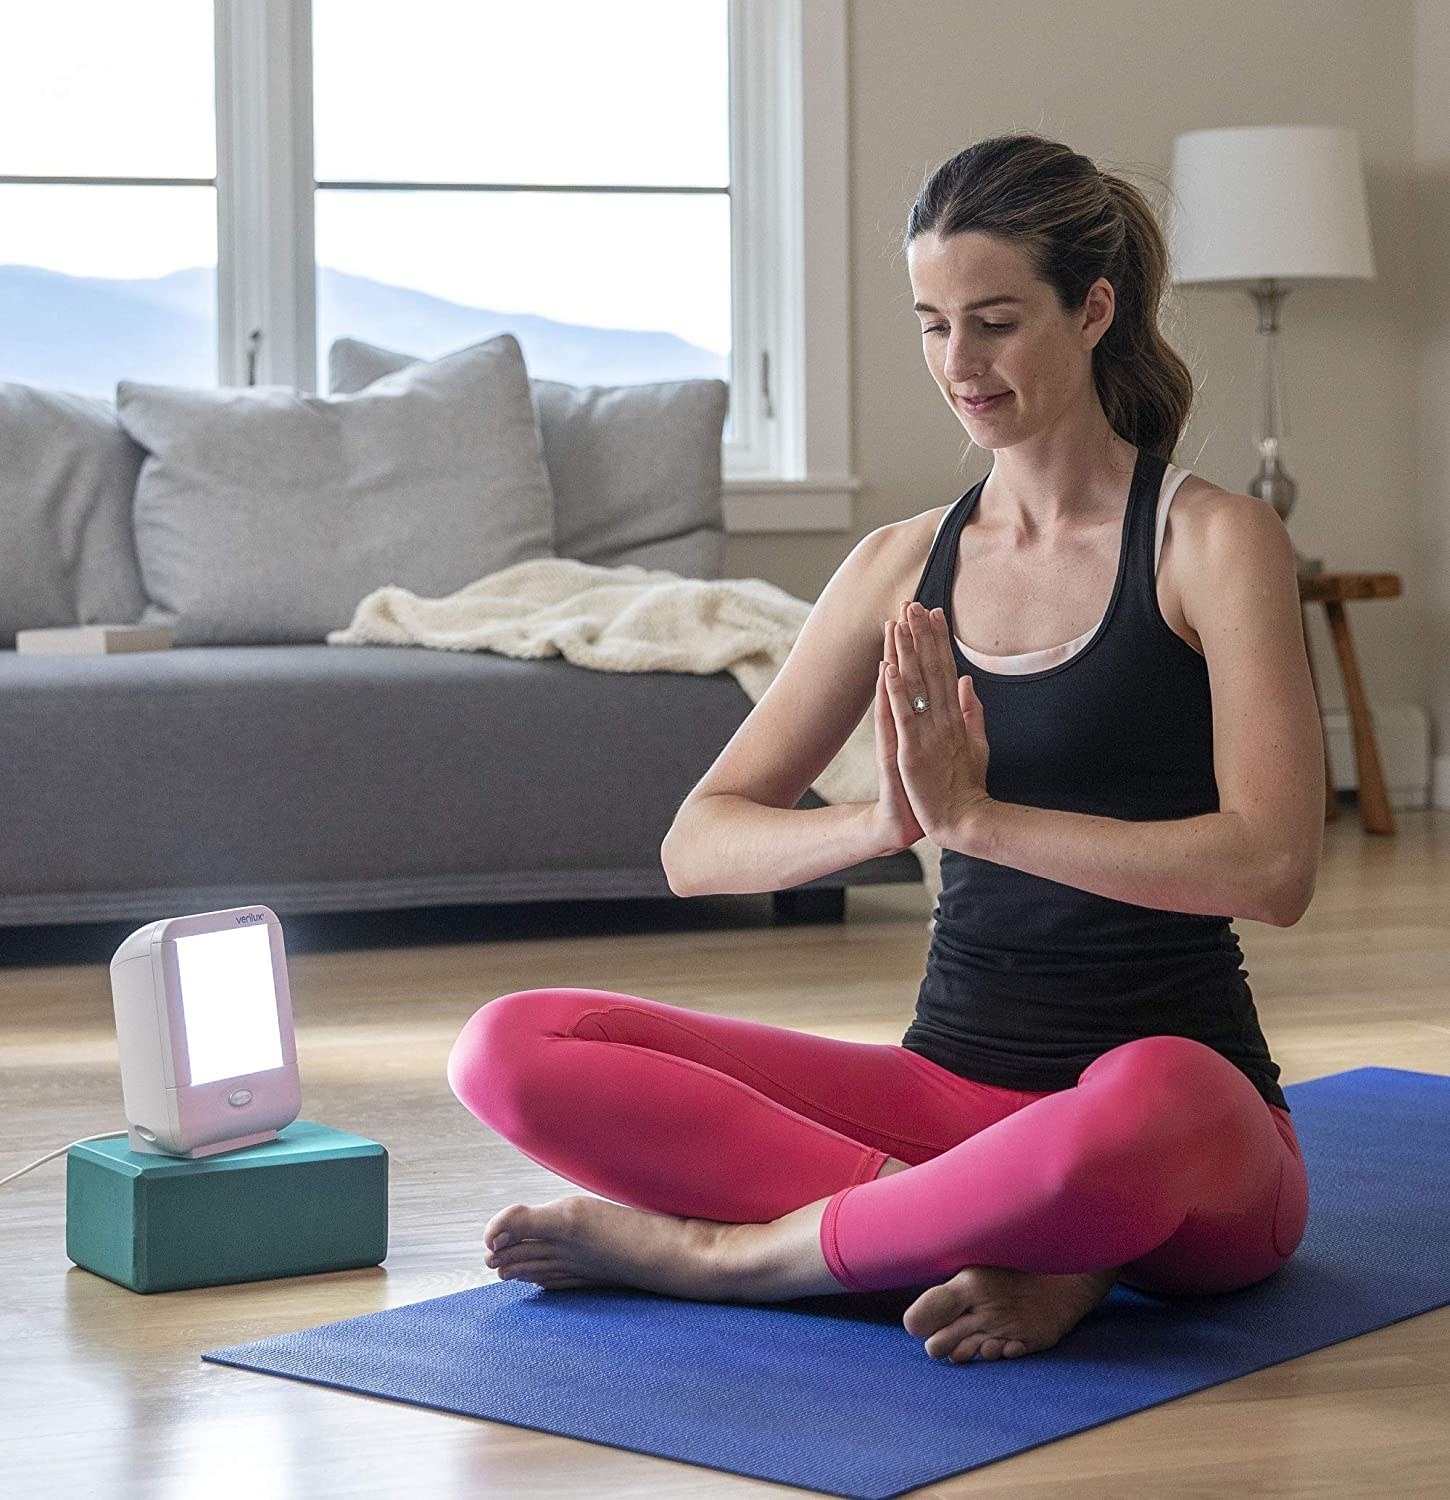 A person sitting crossed legged on a yoga mat with a small lamp beside them